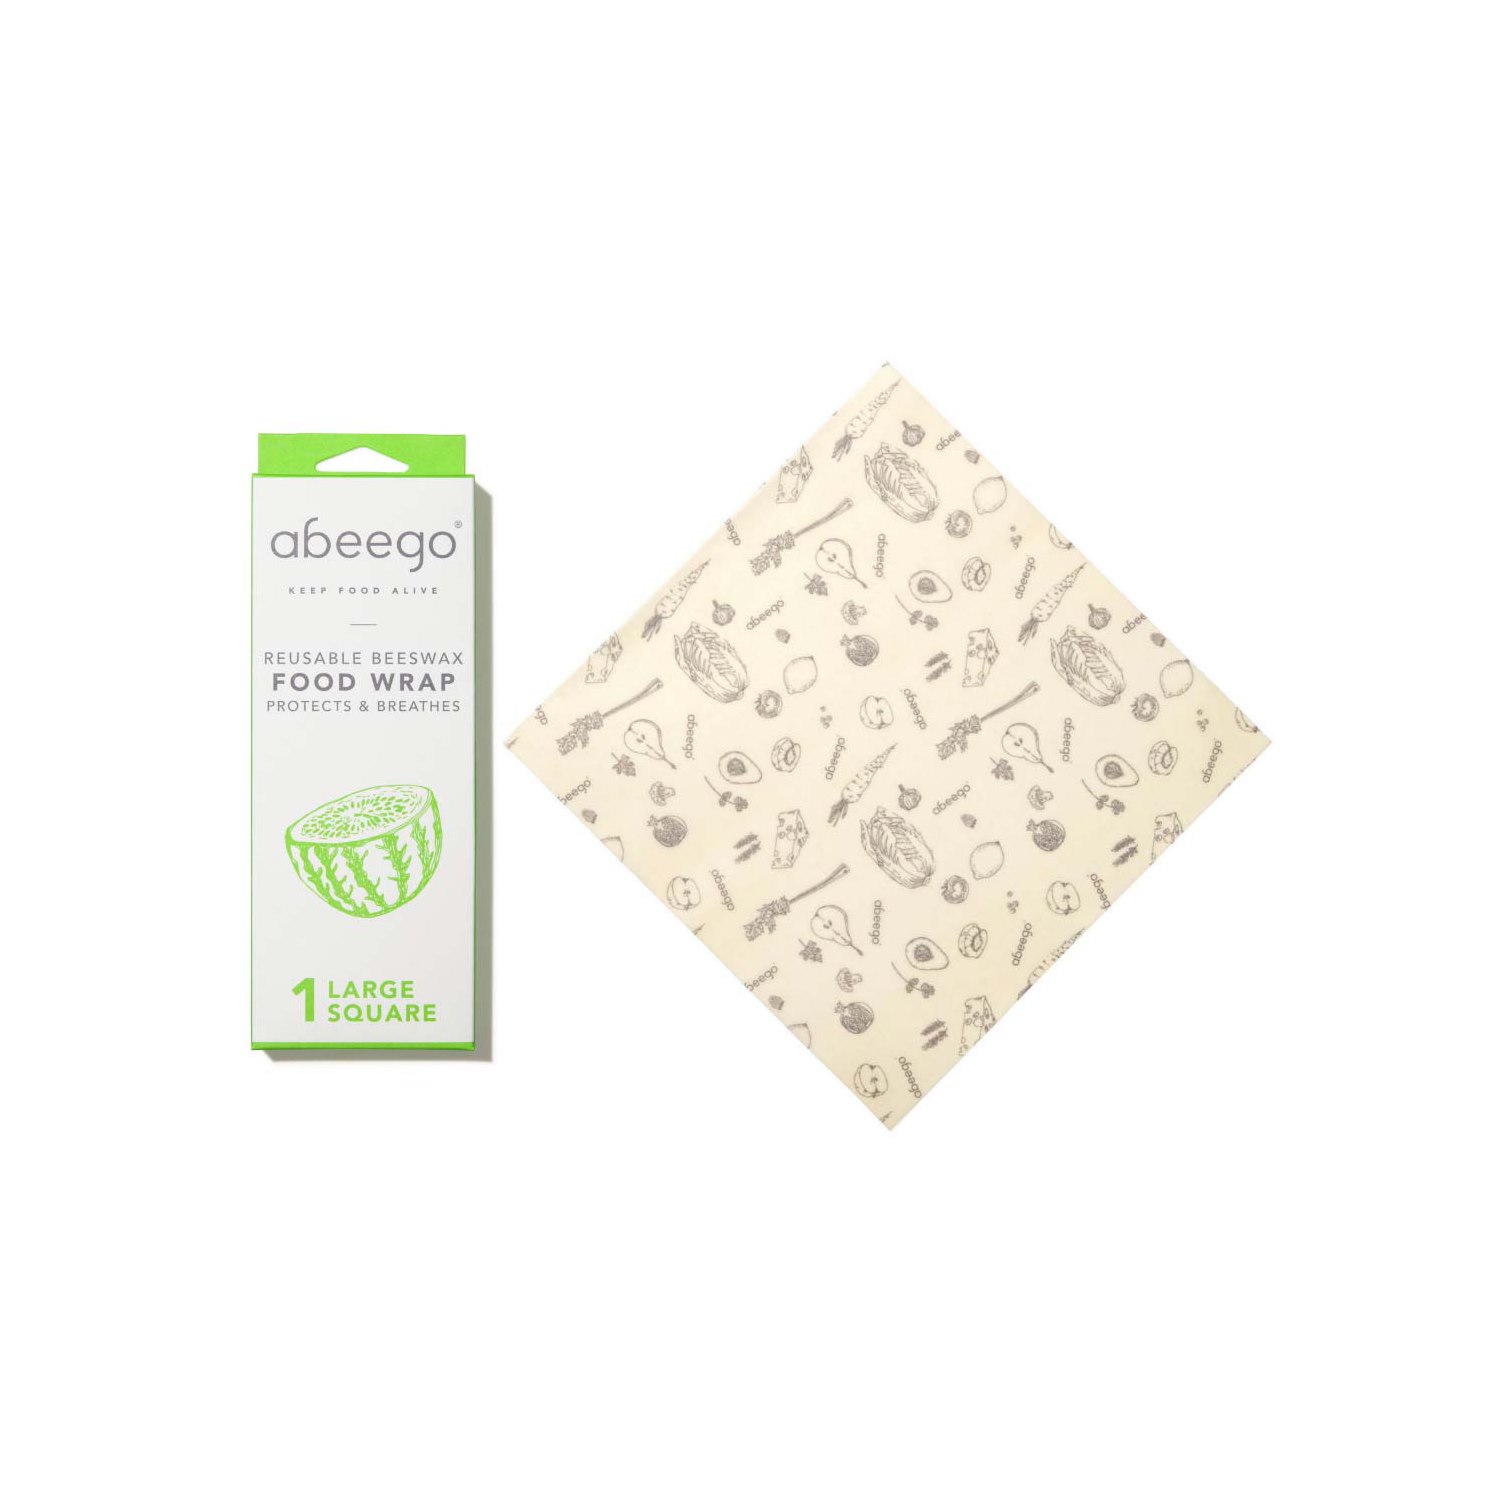 Abeego Beeswax Food Wrap - Square, 1 st Large